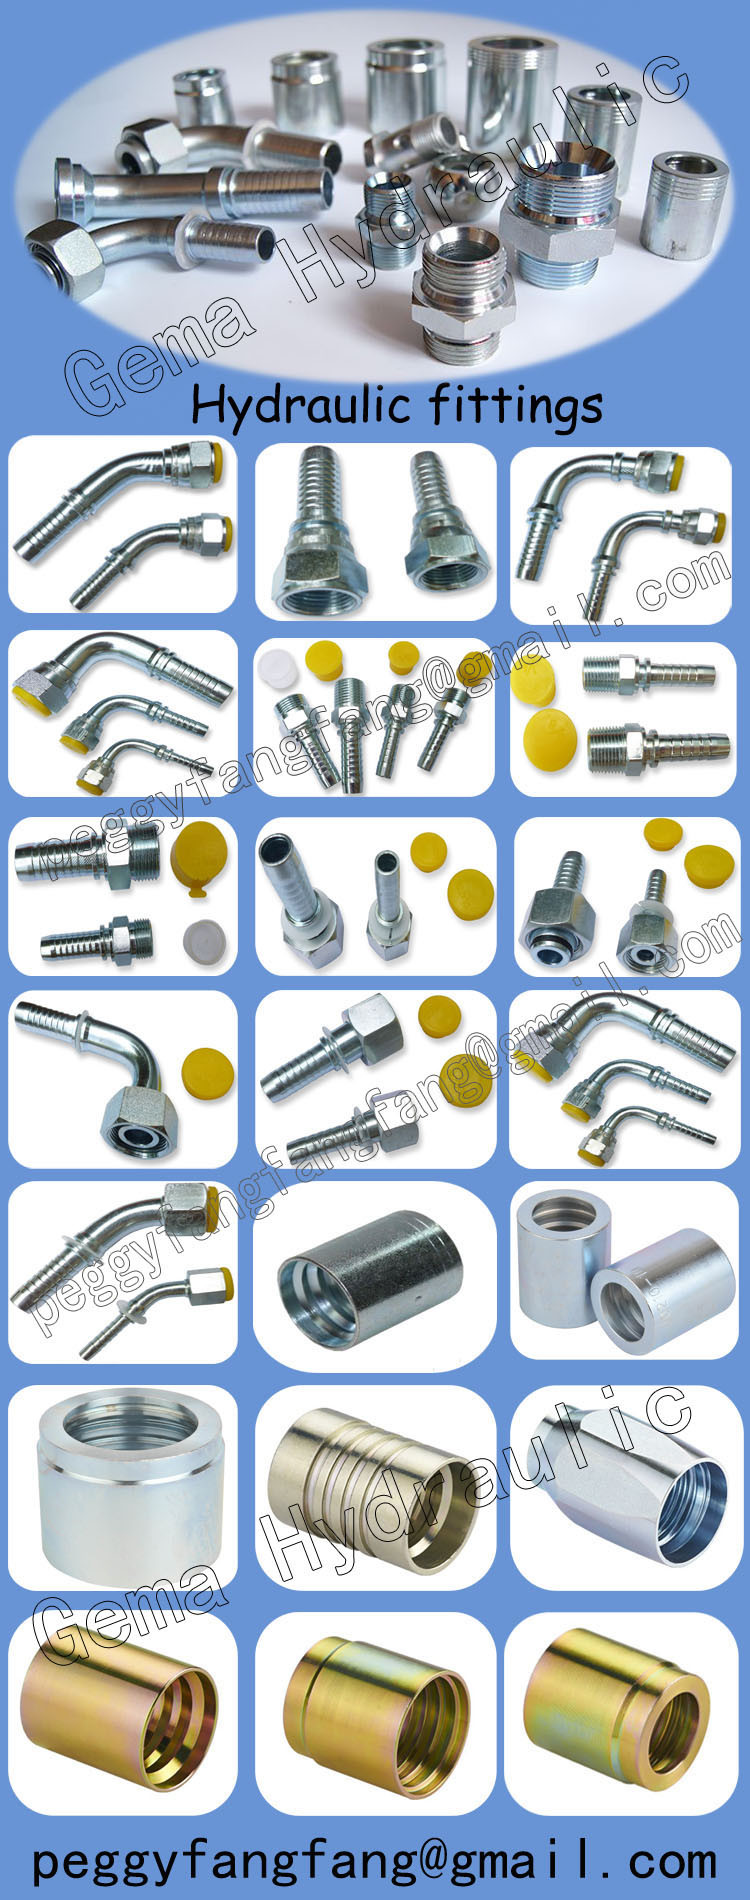 Ss Stainless Steel 22611 Female Hose Fitting Crimping Fitting Bsp Thread Hydraulic Rubber Pipe Fitting Pipe Ferrule Fittings